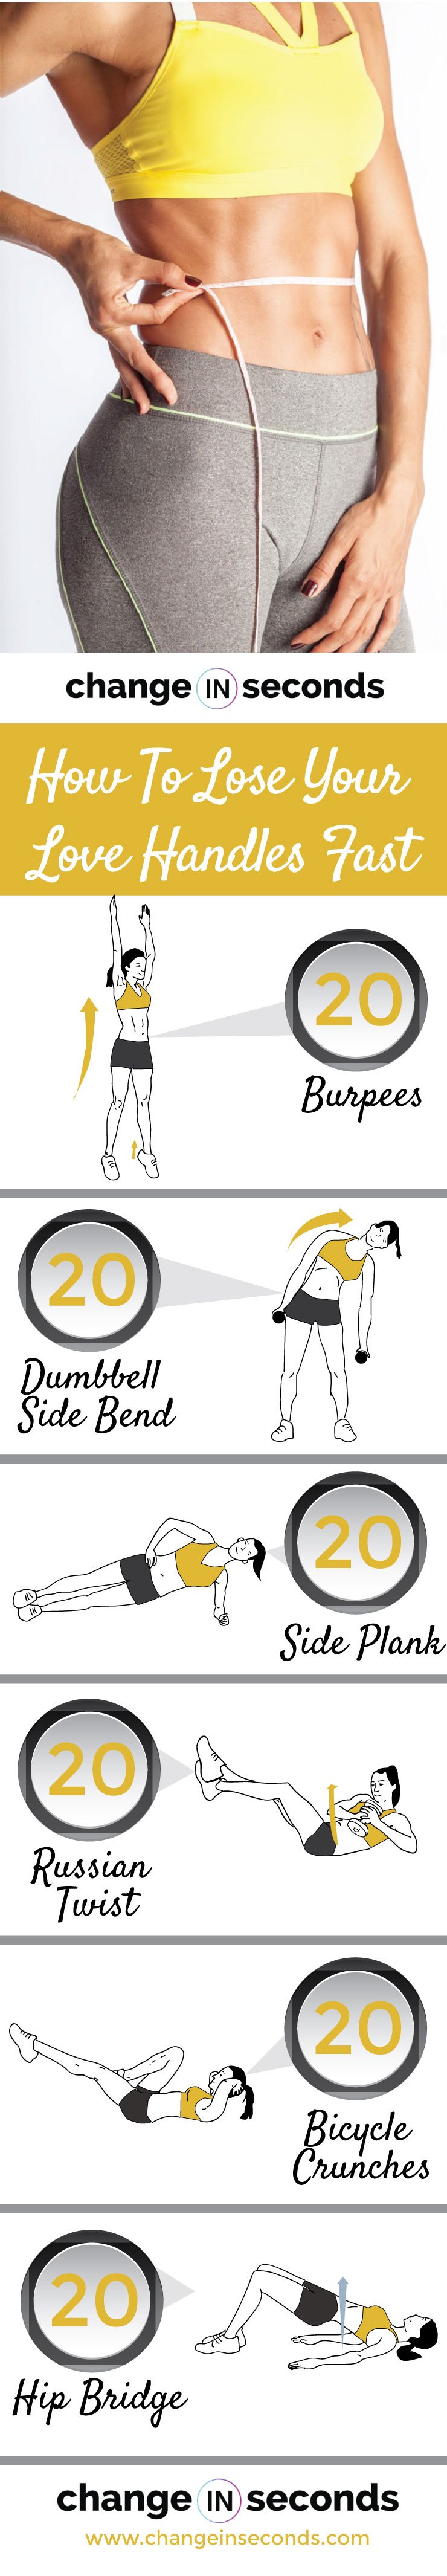 Lose Your Love Handles Workout In 6 Days Or 6 Week!